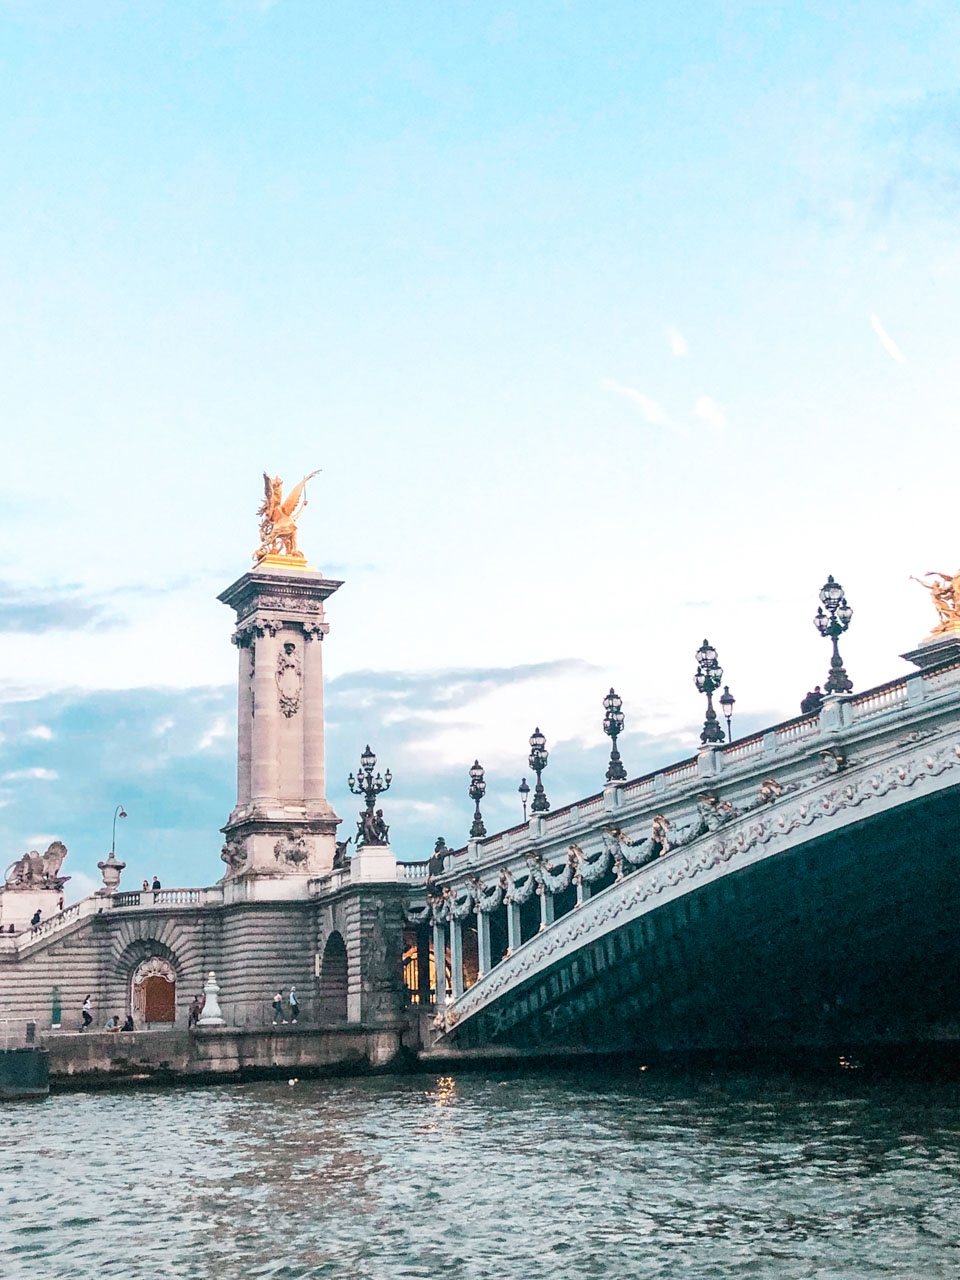 A close-up shot of the Pont Alexandre-III bridge in Paris, France seen from a cruise boat